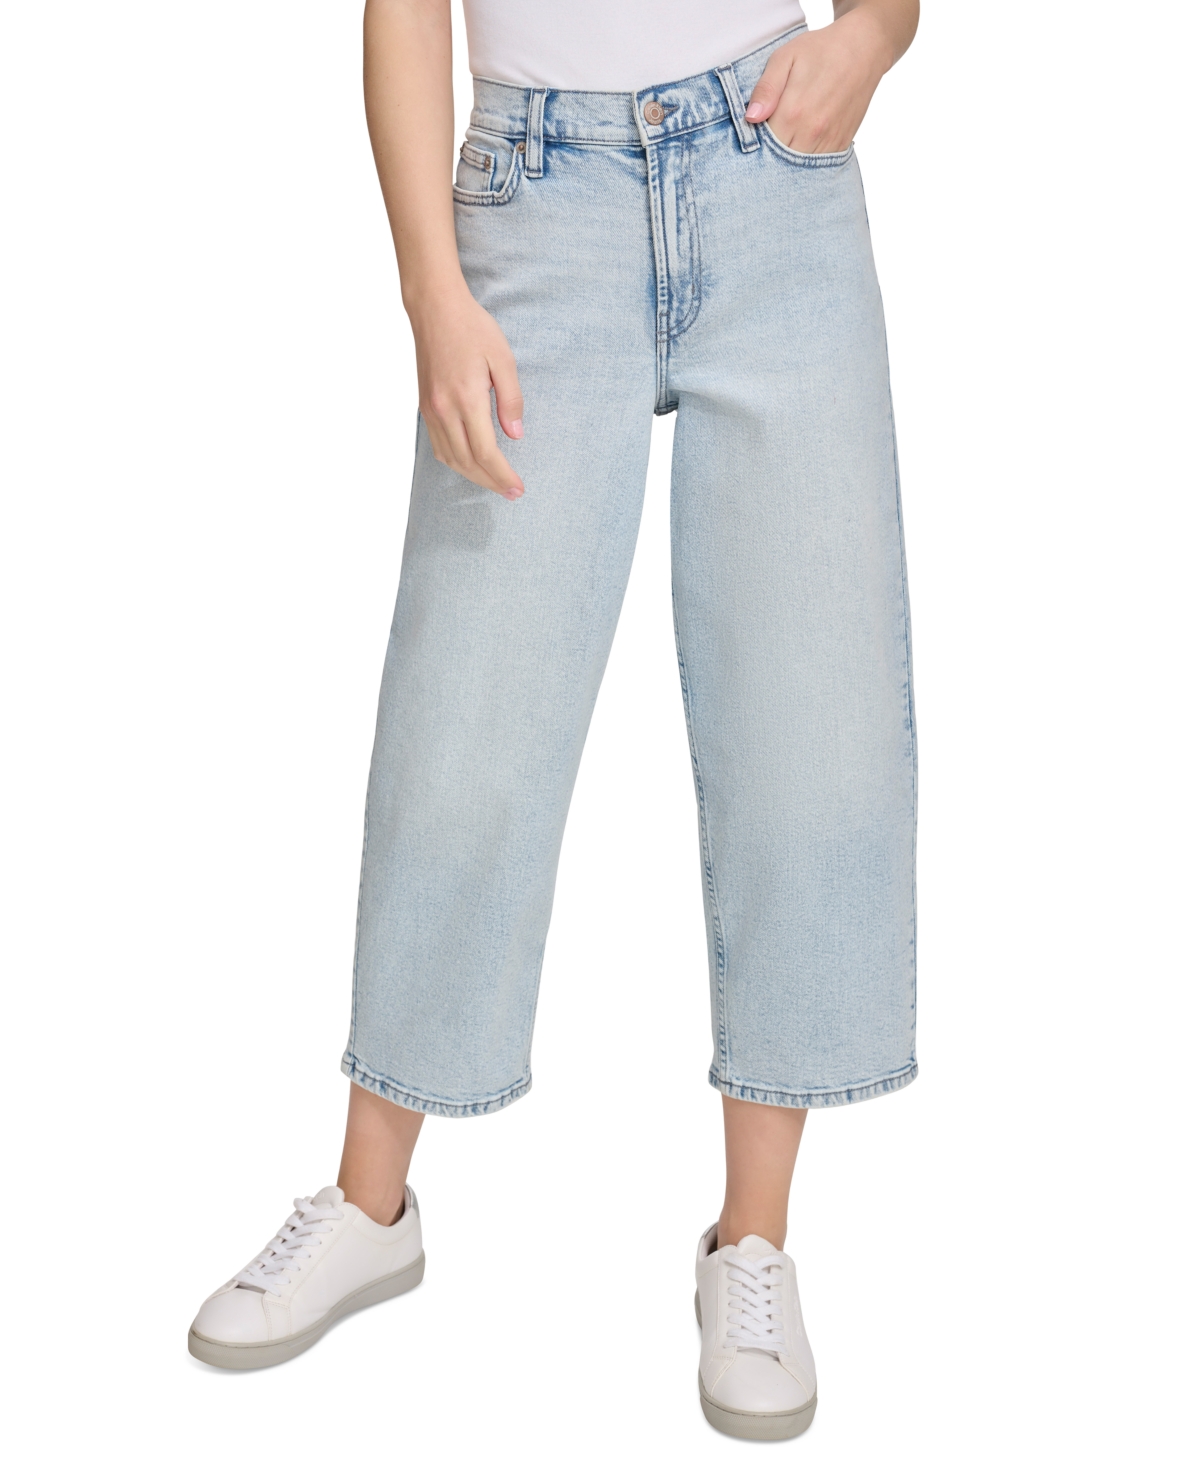 Women's '90s-Fit High-Rise Cropped Denim Jeans - Ryder